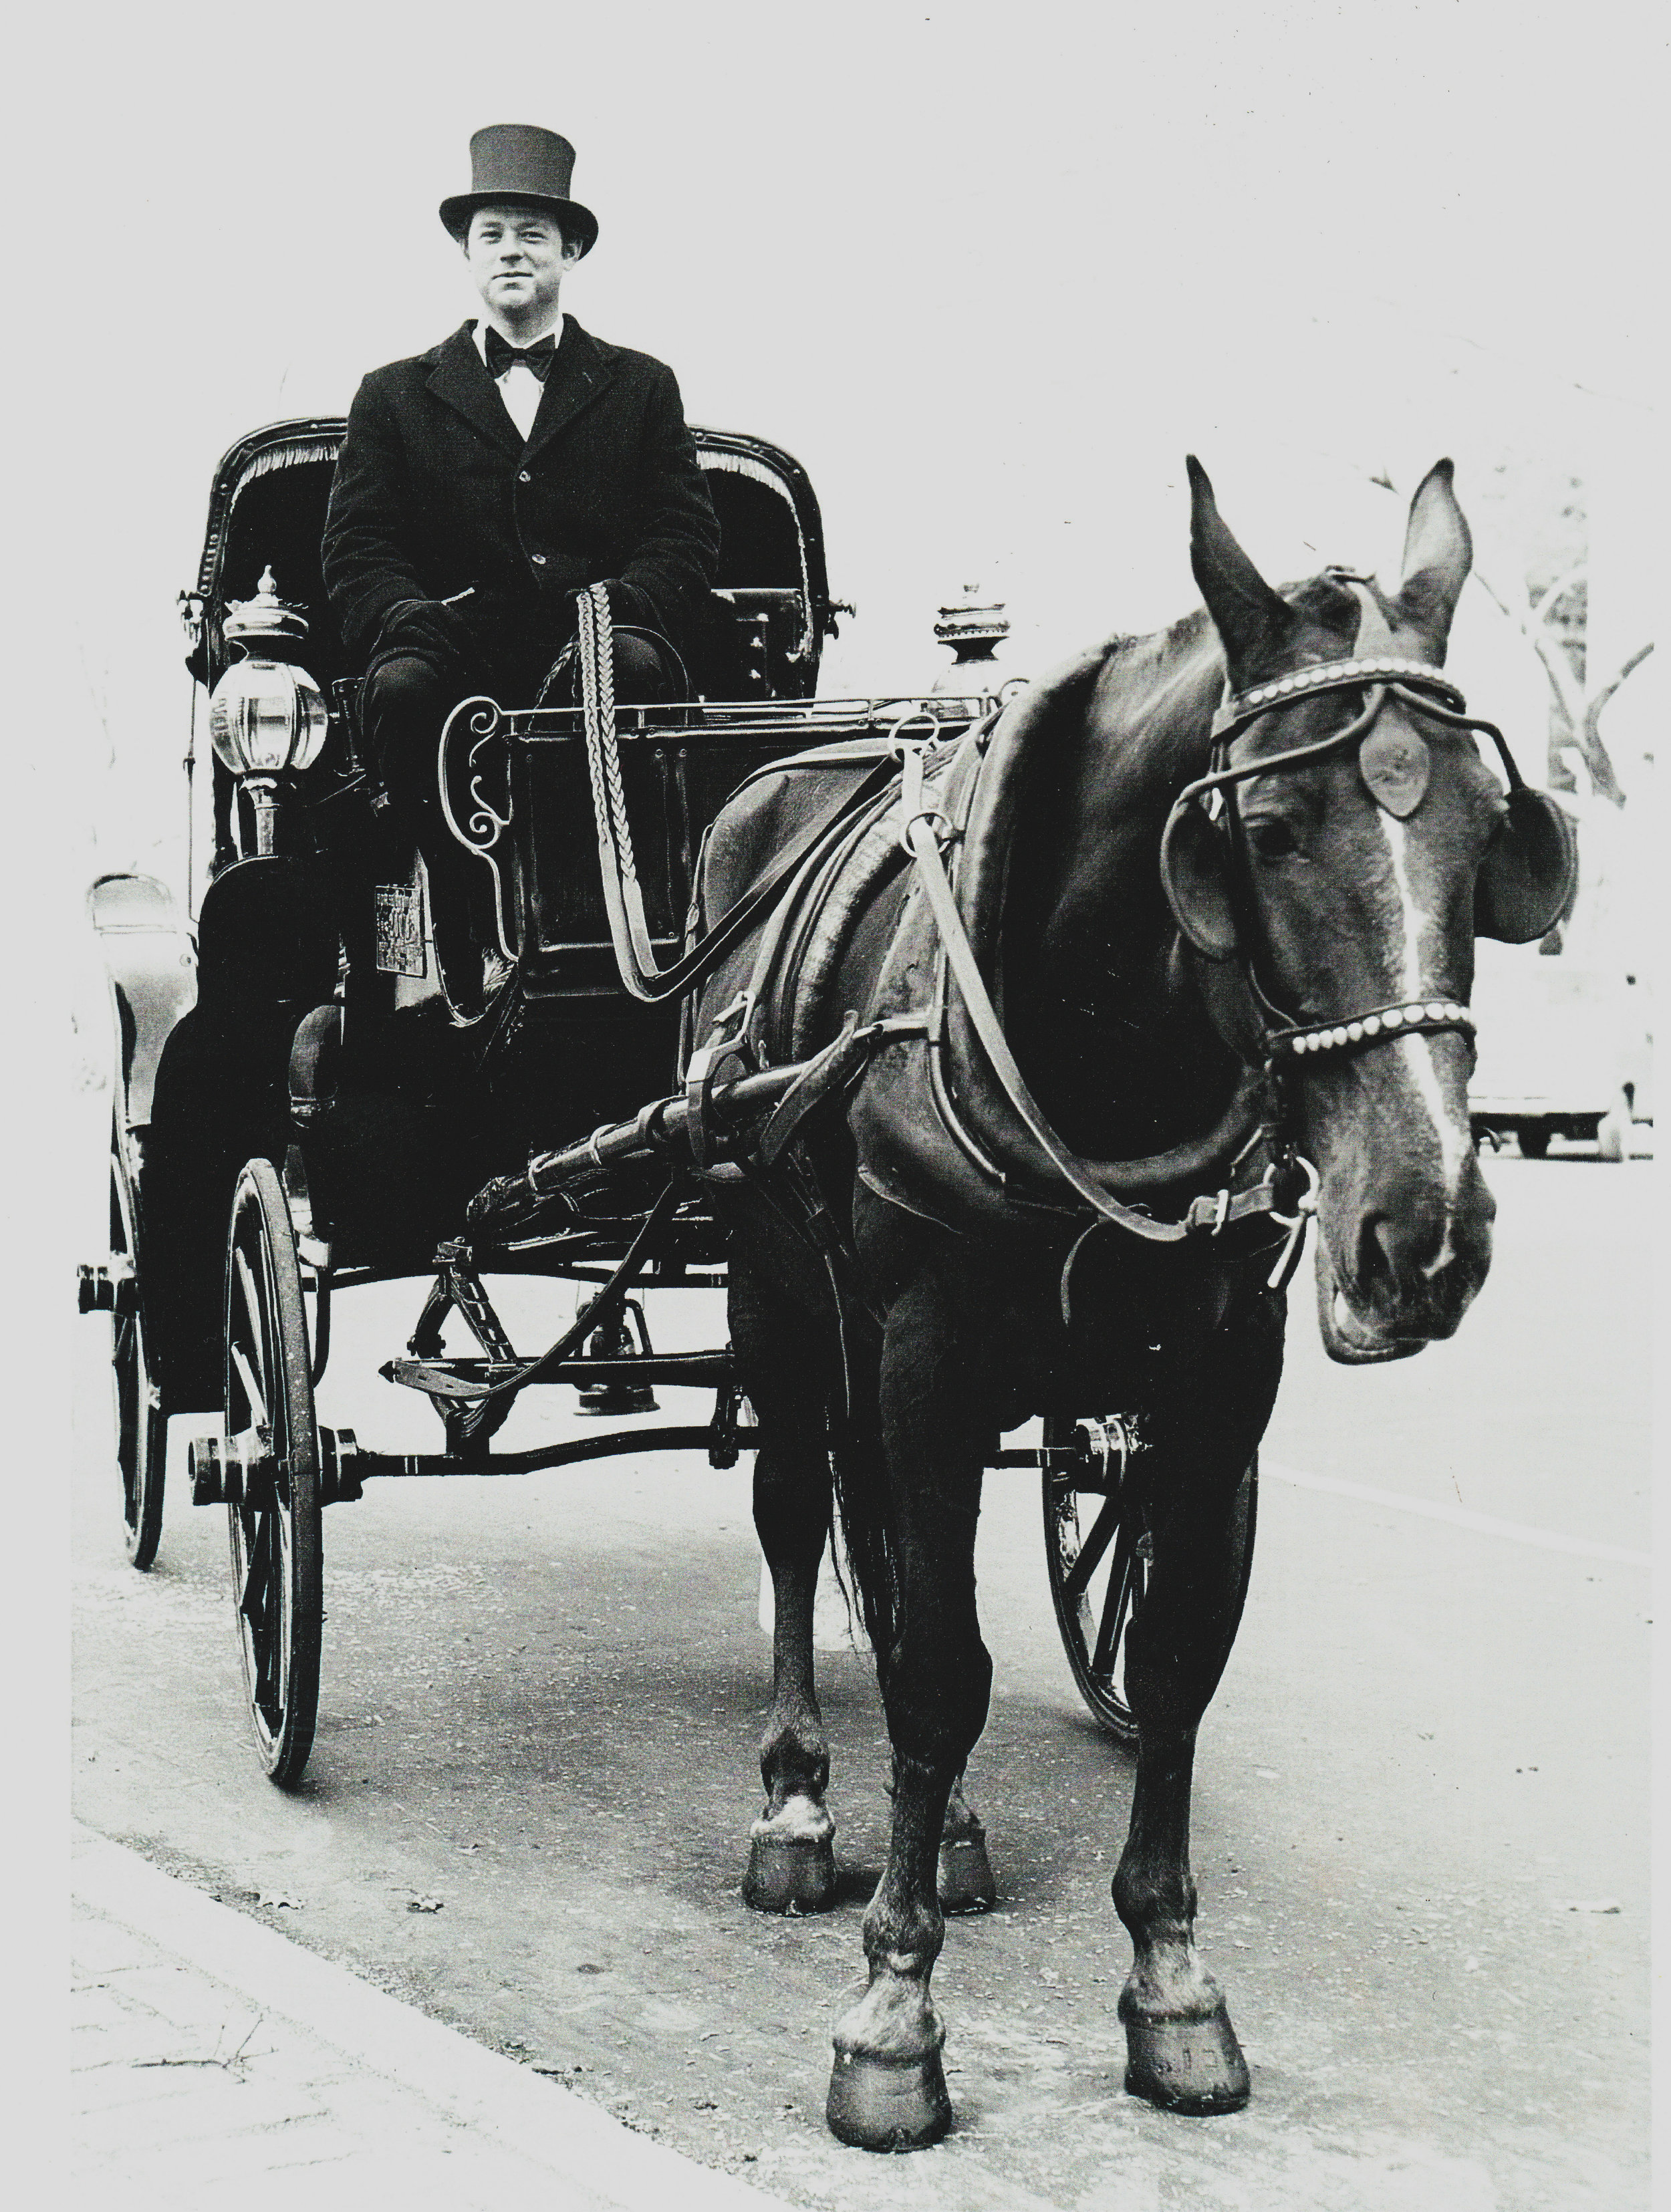 Central Park and NYC Horse Carriage Ride OFFICIAL ( ELITE Private) Since  1970™